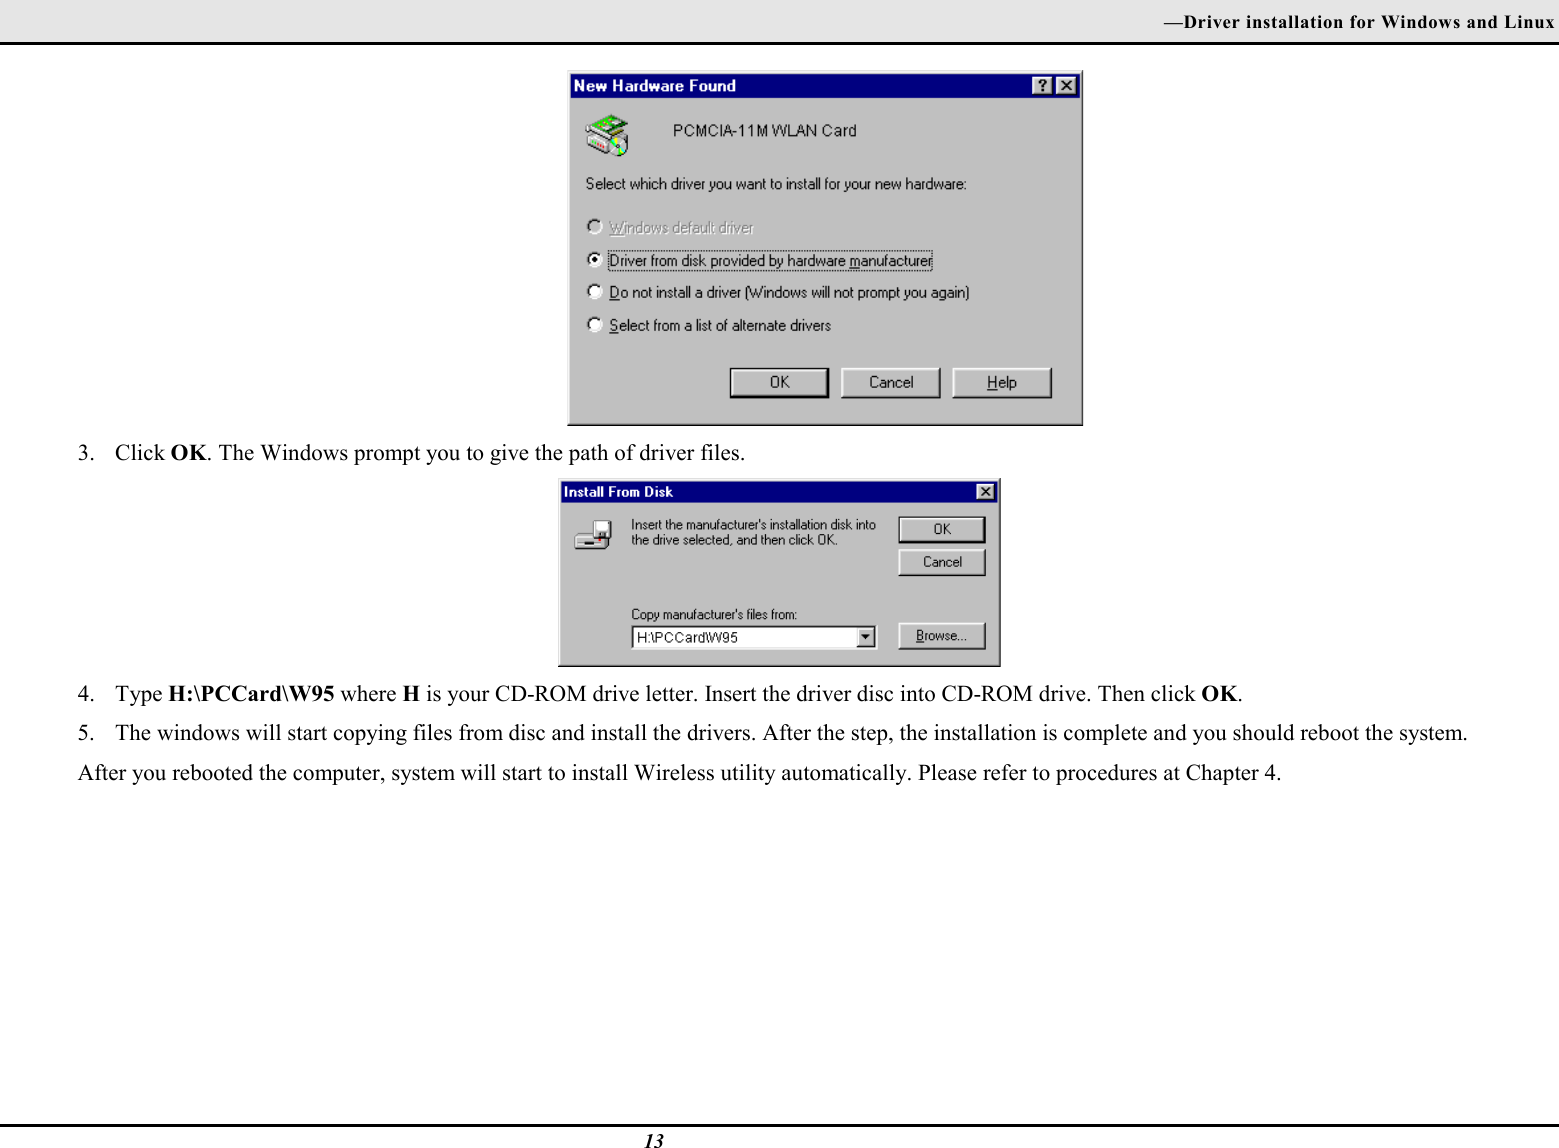 —Driver installation for Windows and Linux133. Click OK. The Windows prompt you to give the path of driver files.4. Type H:\PCCard\W95 where H is your CD-ROM drive letter. Insert the driver disc into CD-ROM drive. Then click OK.5. The windows will start copying files from disc and install the drivers. After the step, the installation is complete and you should reboot the system.After you rebooted the computer, system will start to install Wireless utility automatically. Please refer to procedures at Chapter 4.